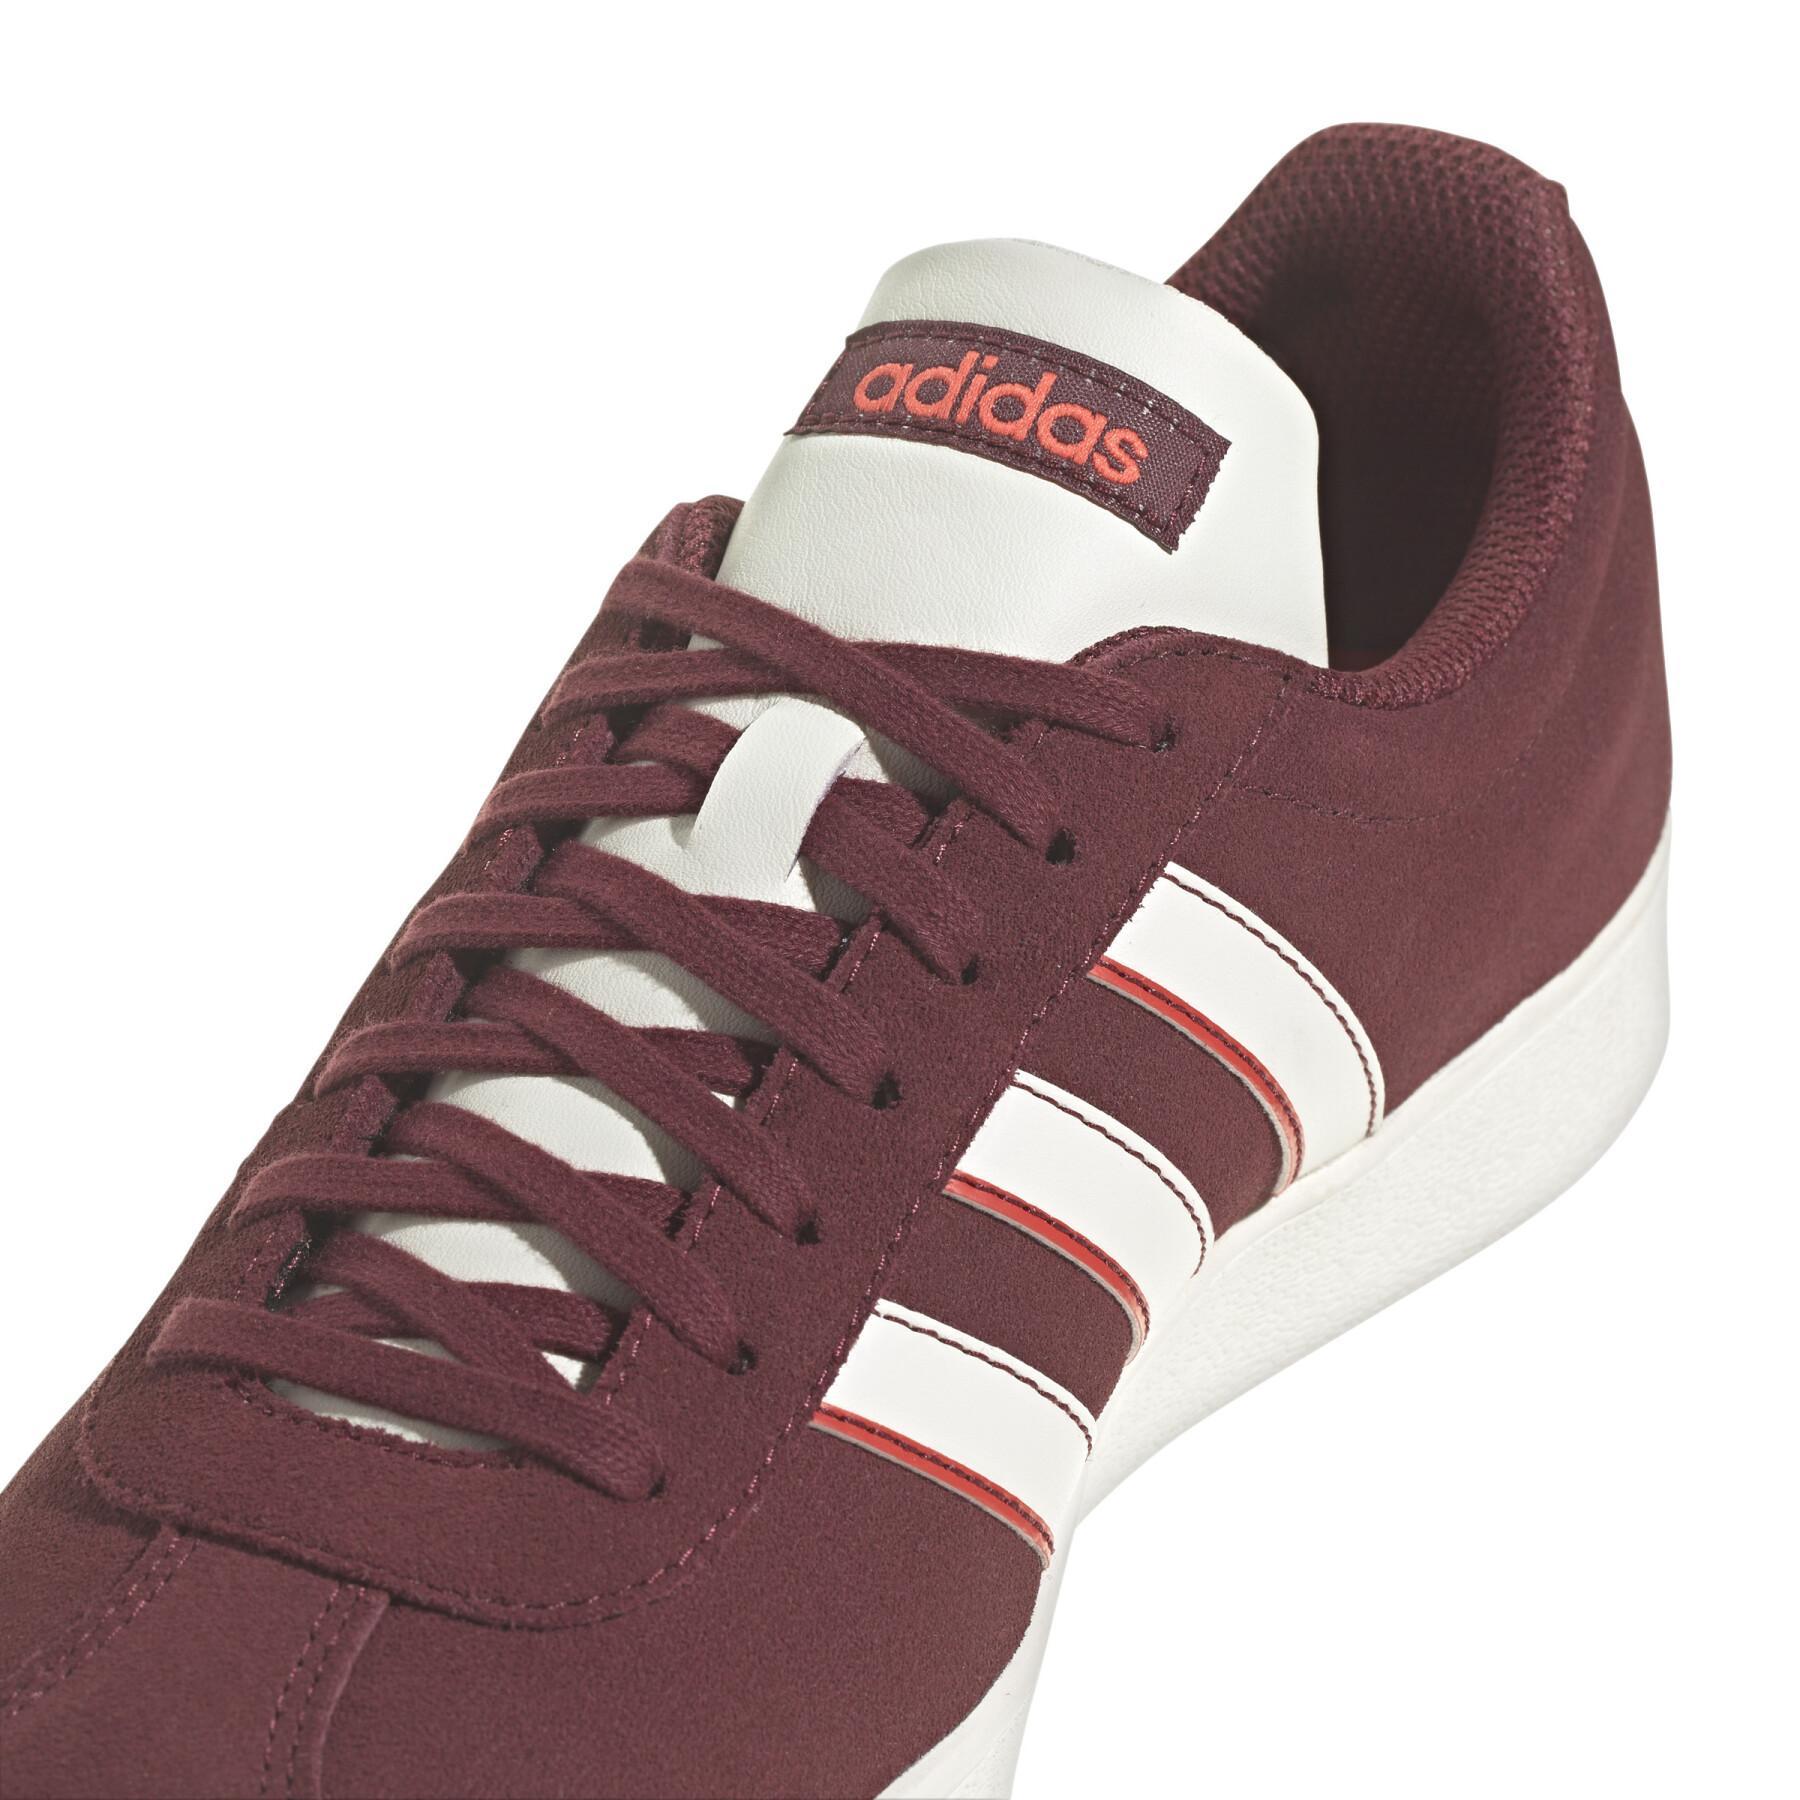 Sneakers adidas VL Court 2.0